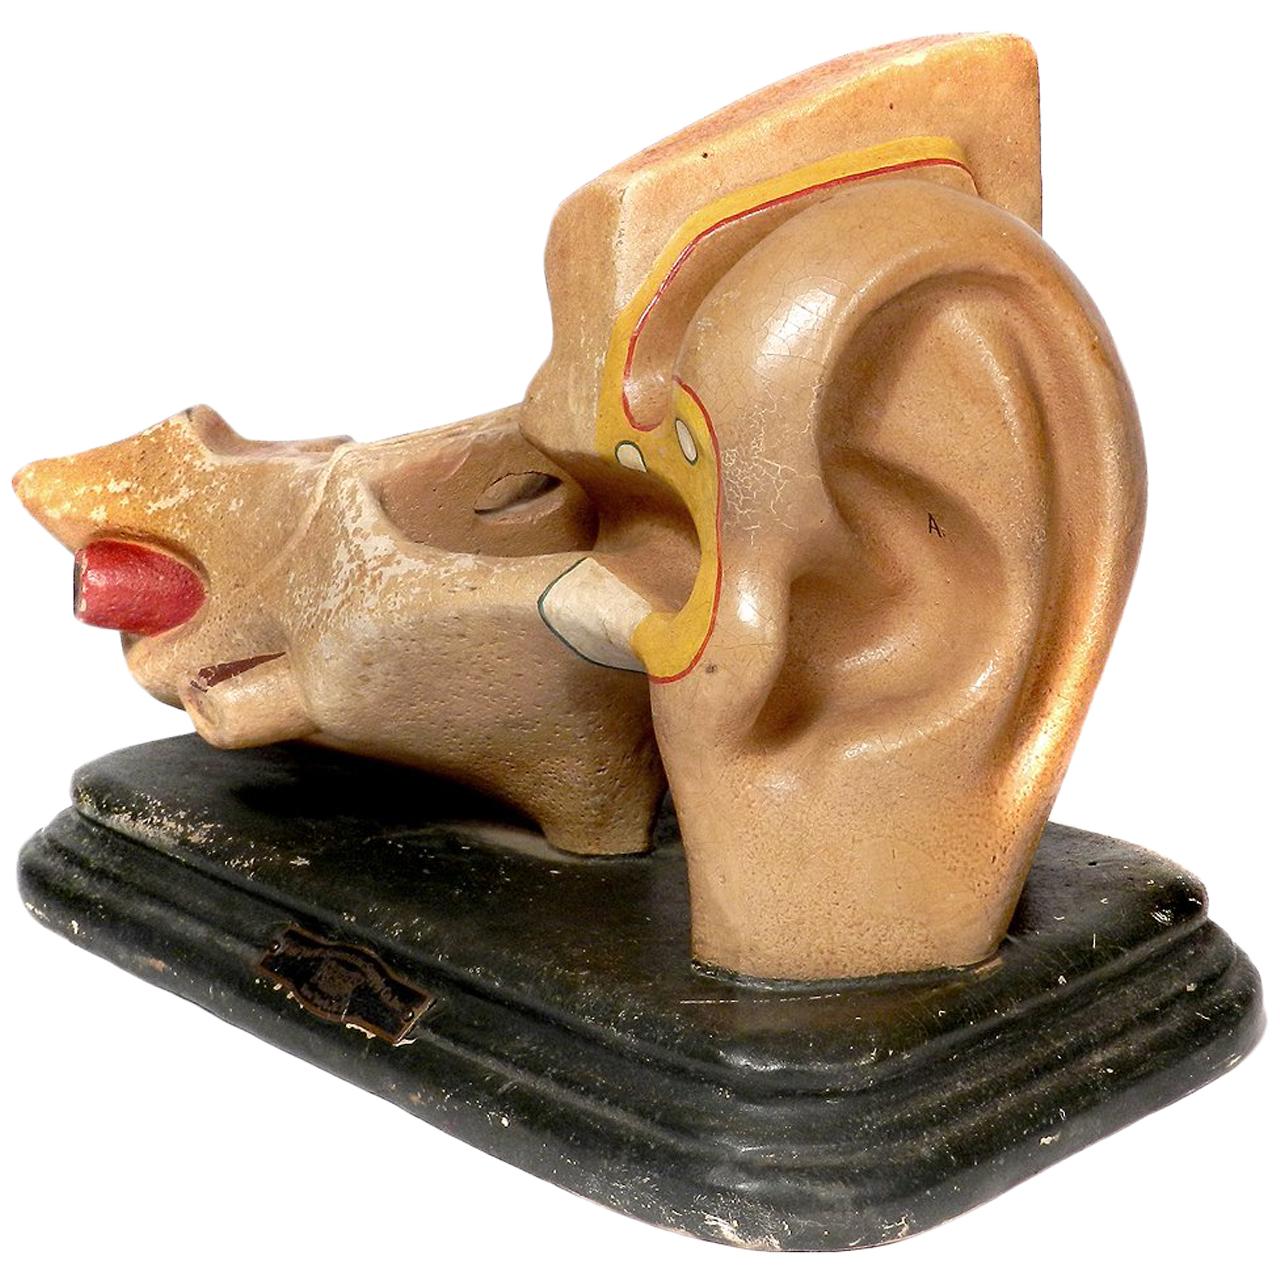 Early Anatomical Model of the Ear